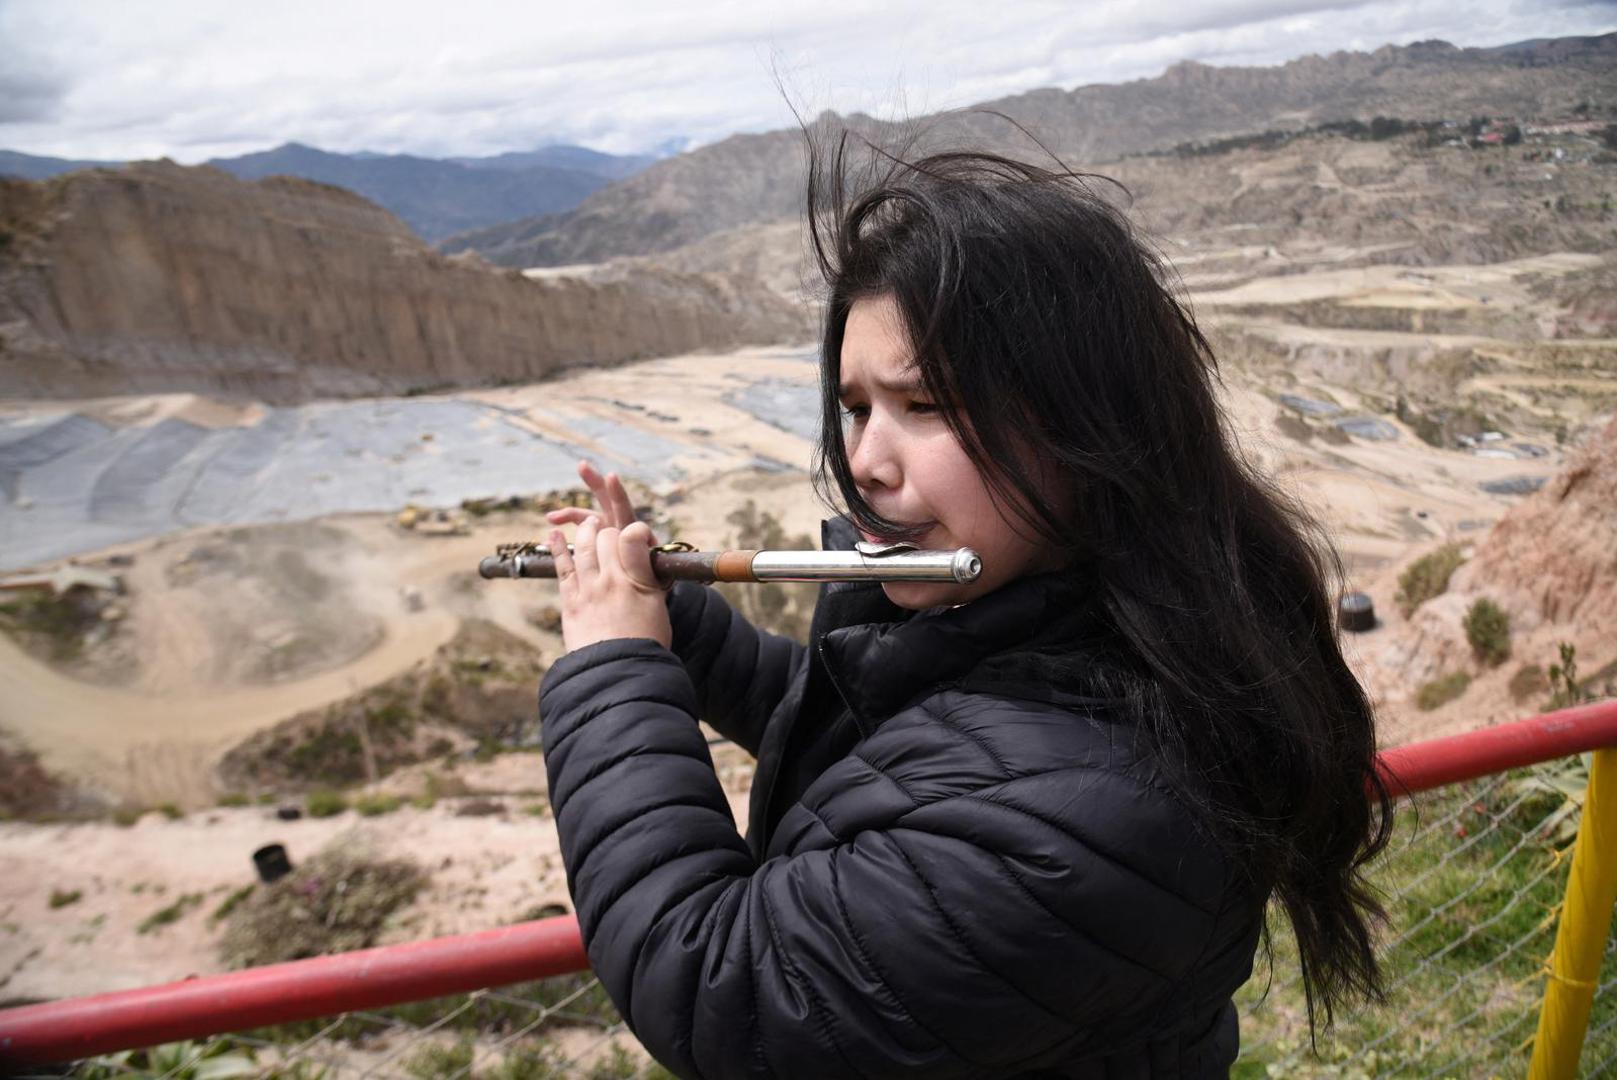 Britney Ruiz, a musician with Paraguay's Cateura Recycled Instruments Orchestra, plays a flute made with recycled materials at the viewpoint of the Sak'a Churu landfill in Alpacoma, in La Paz, Bolivia February 27, 2023. REUTERS/Claudia Morales Photo: CLAUDIA MORALES/REUTERS